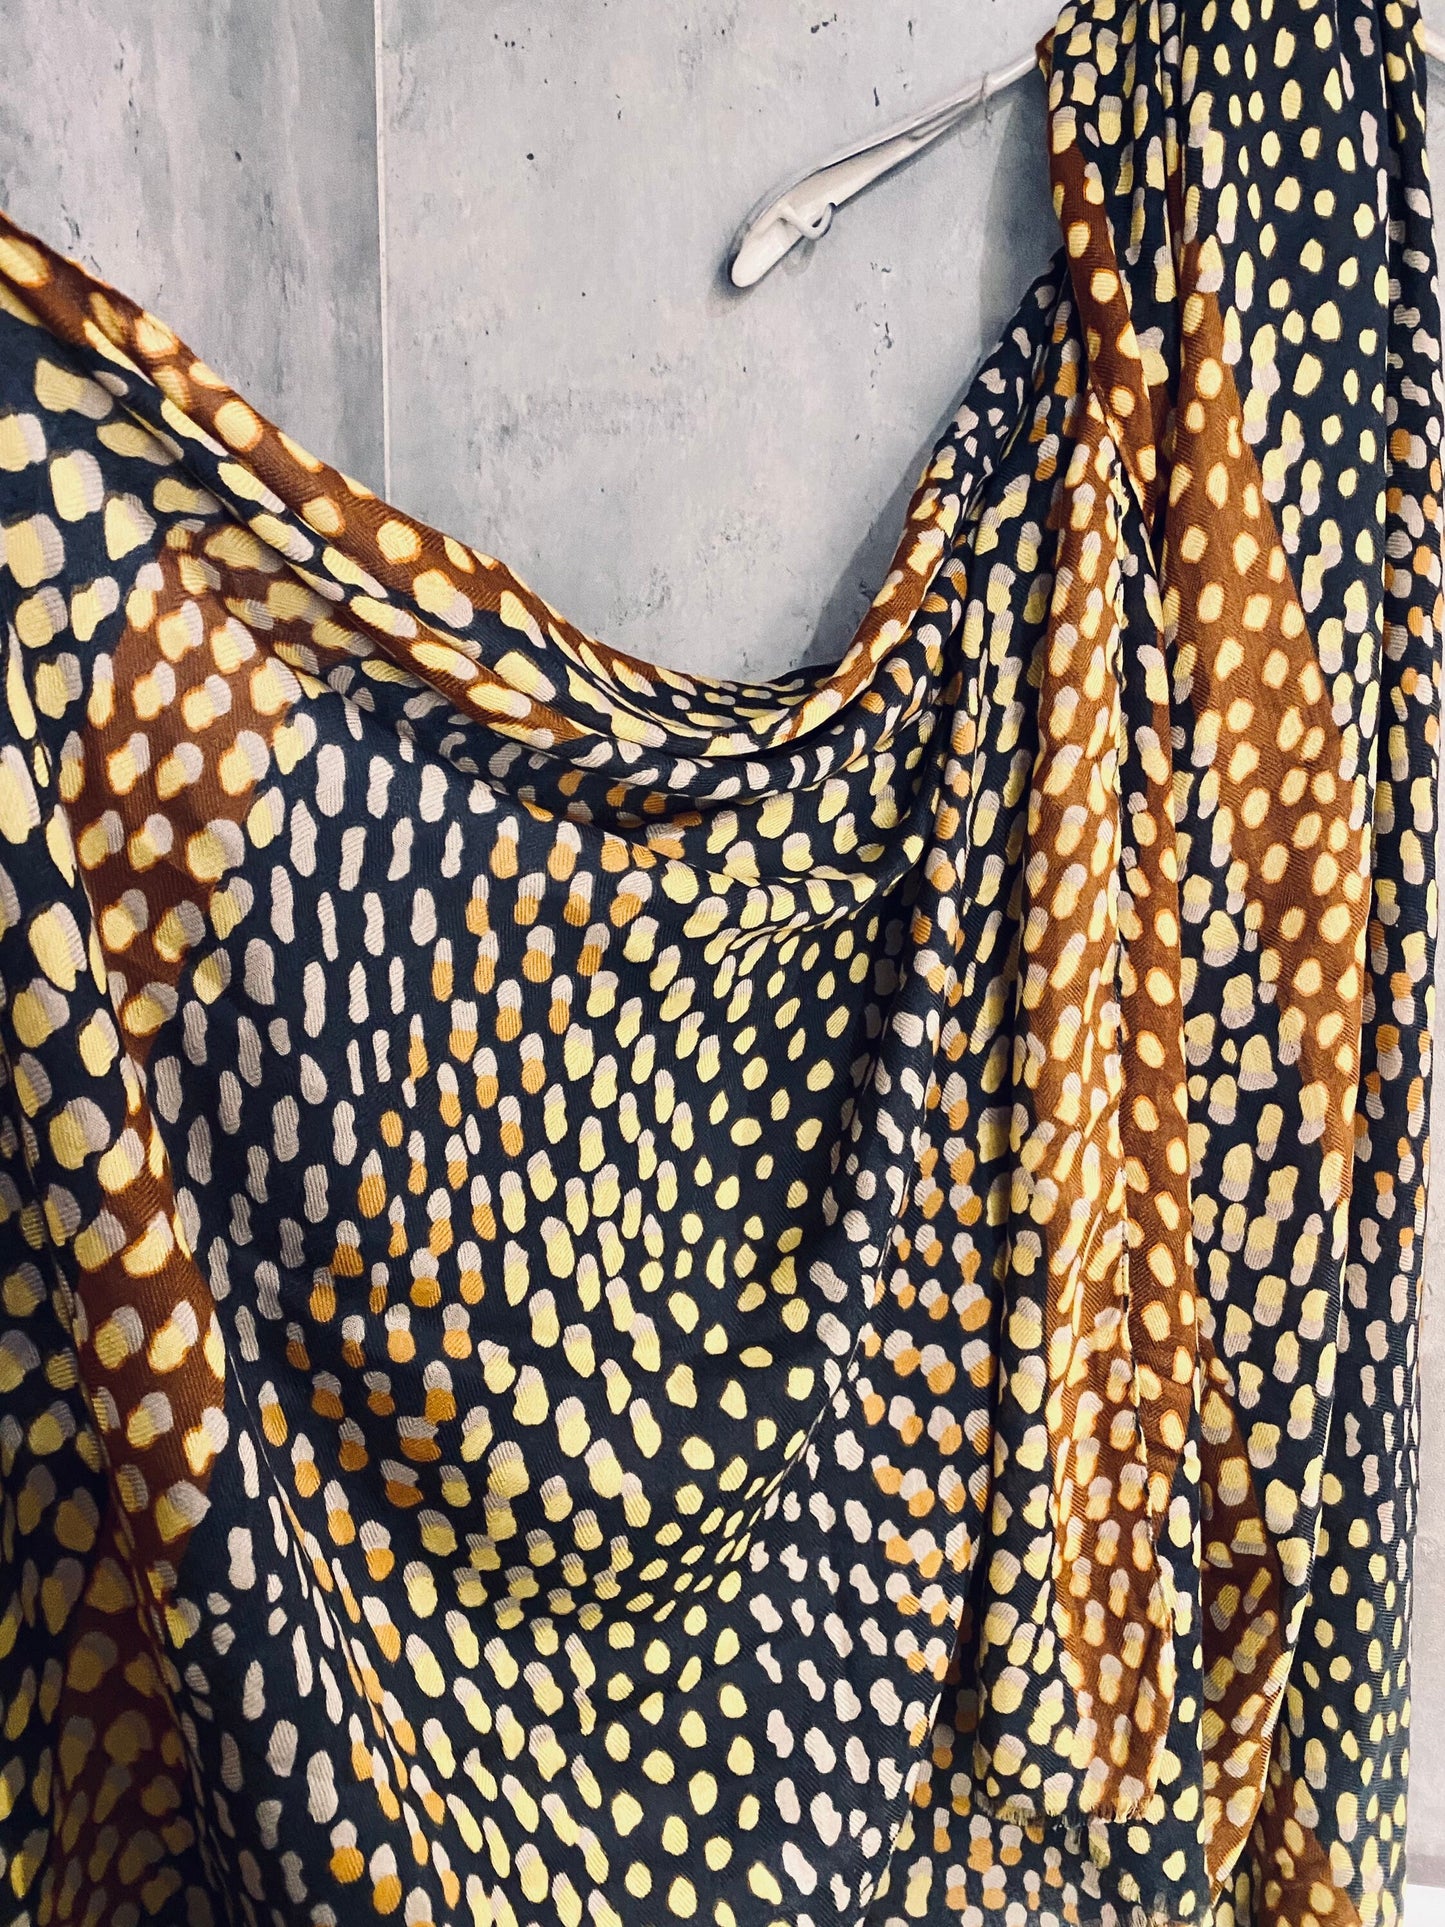 Seamless Polka Dot Pattern Yellow Cotton Scarf/Summer Autumn Winter Scarf/Gift For Mom/Gift For Her Birthday Christmas/Scarf Women/UK Seller